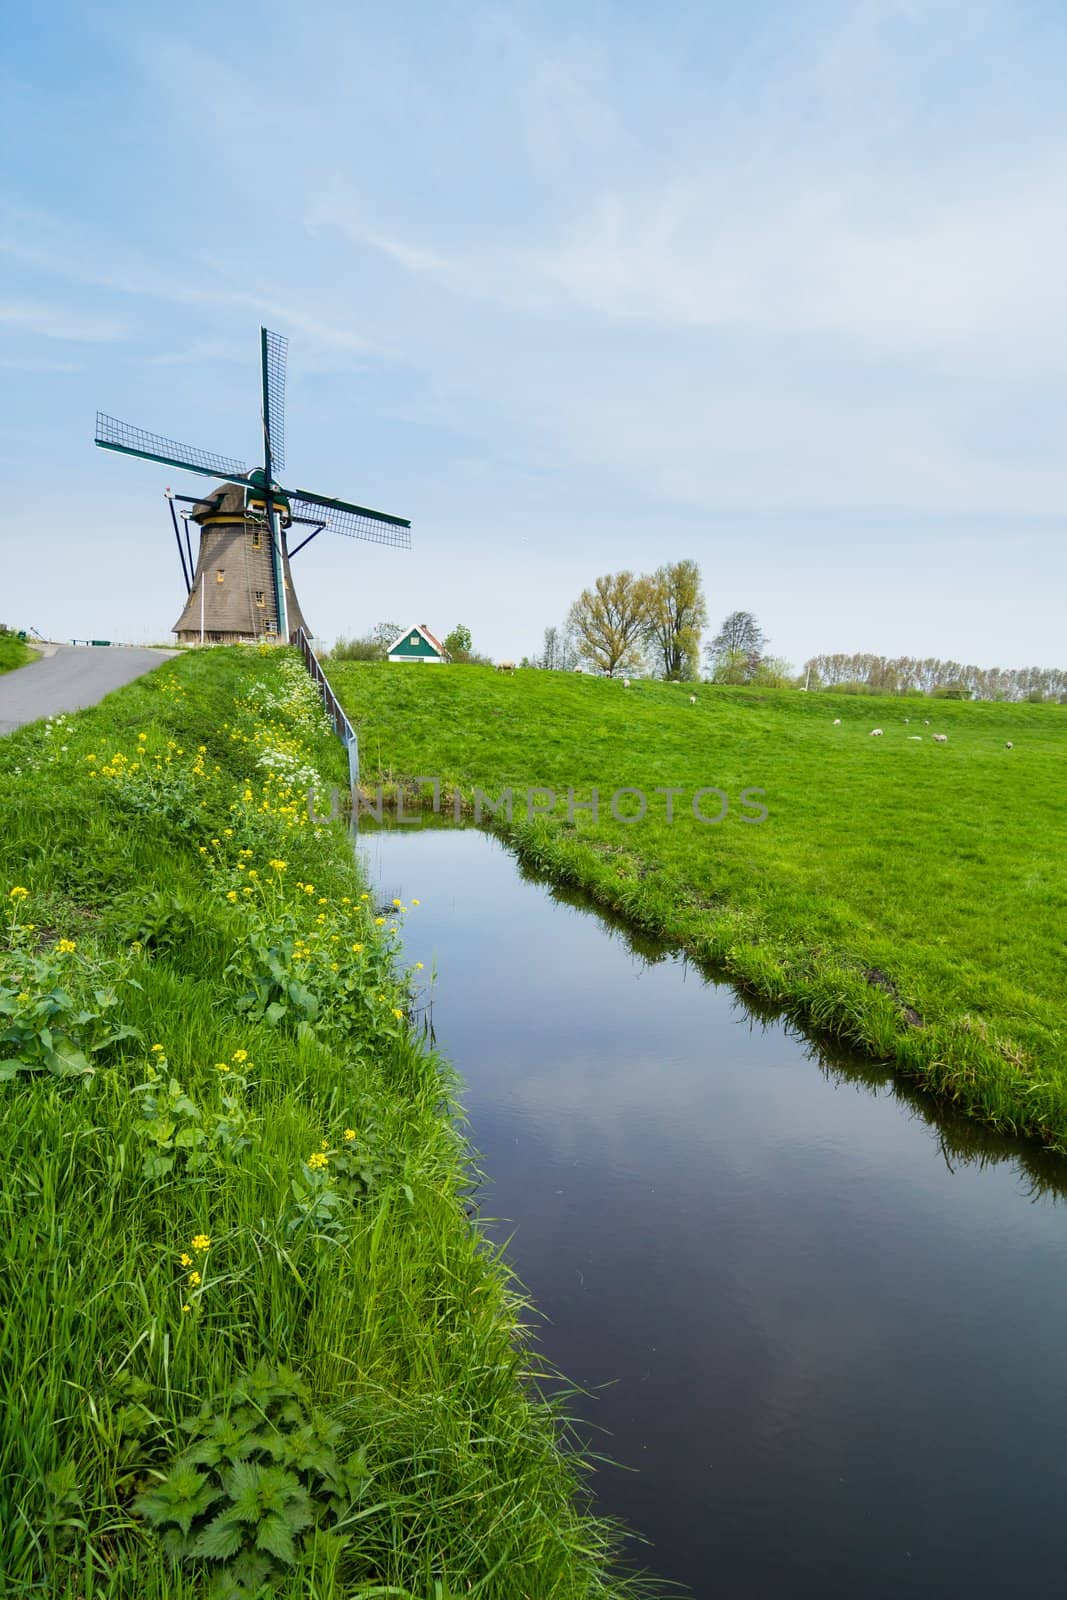 A traditional Dutch windmill near the canal. Netherlands. Vertical view